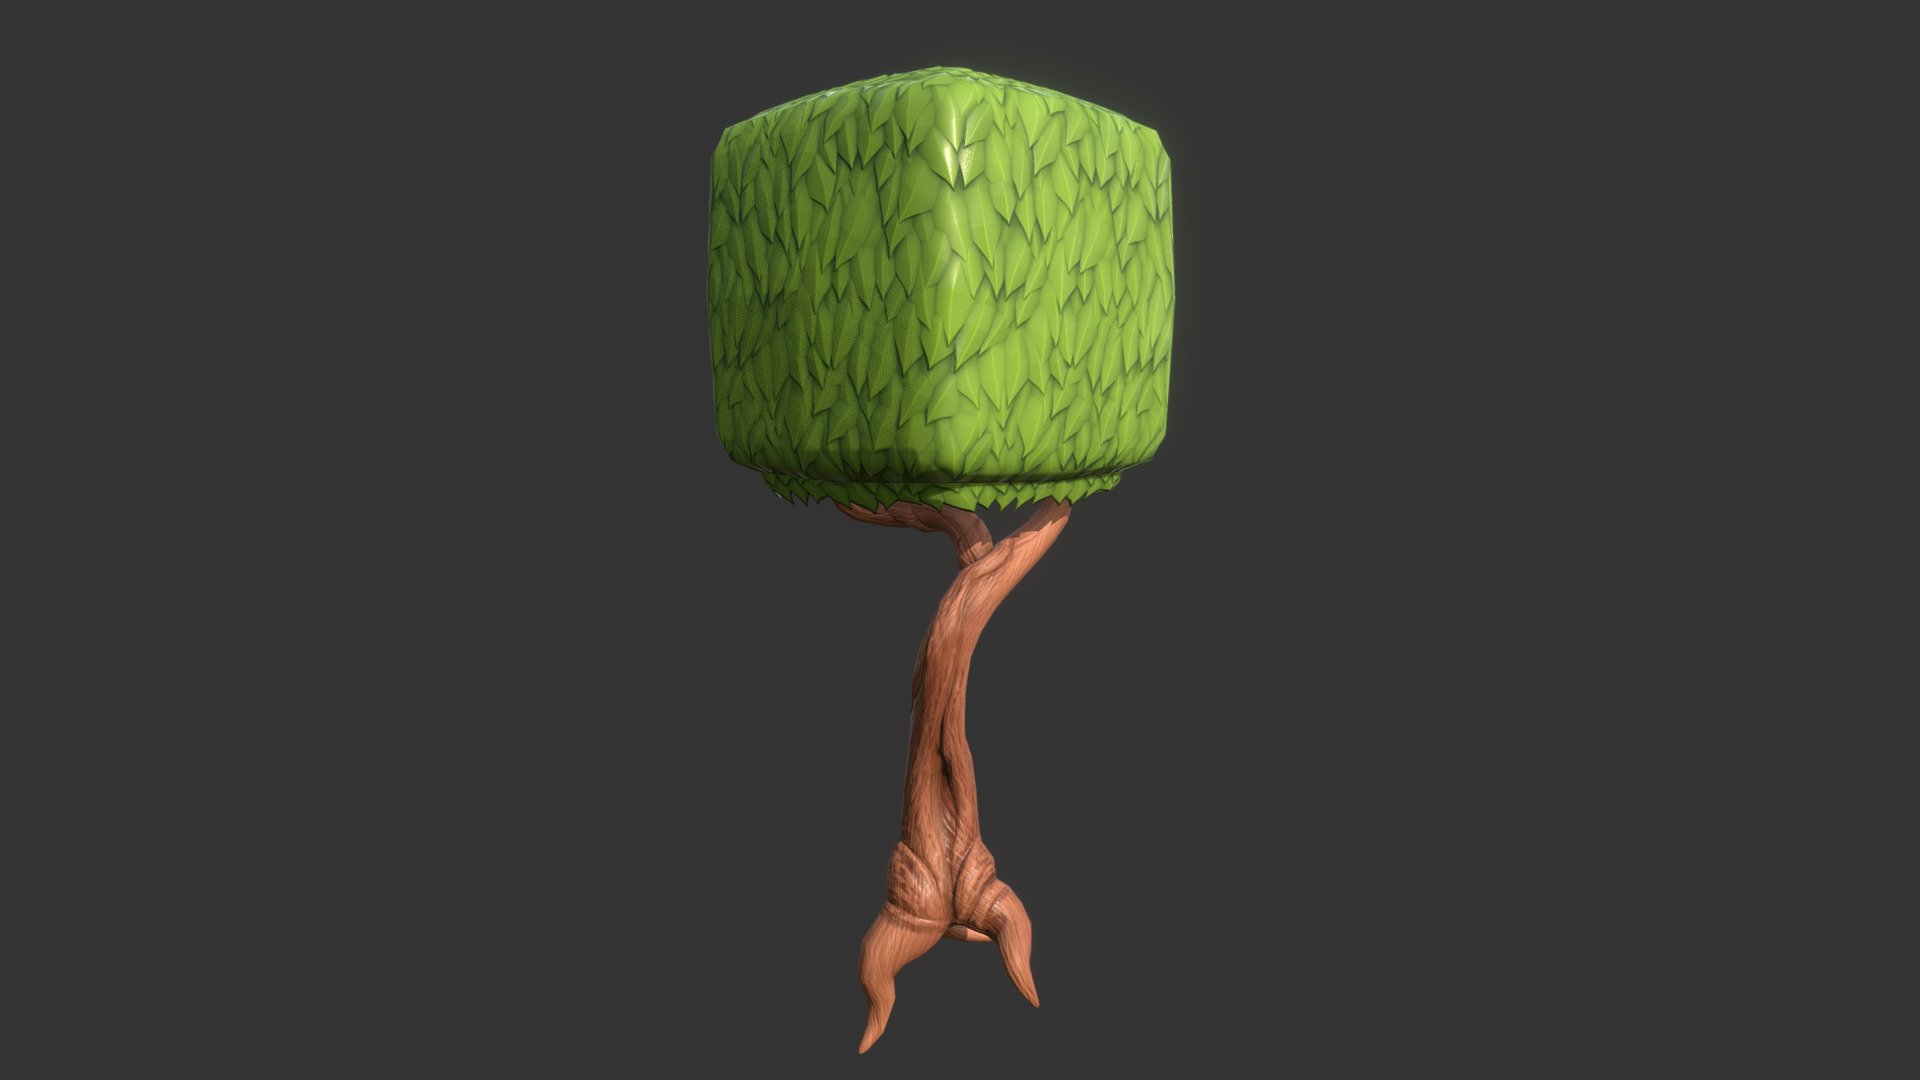 I'm now able to sell models on sketchfab, so I decided to give it a try using this tree. I might make more variations of trees and turn it into a stylized tree pack.

When bought you will recieve:
- OBJ file
- FBX file
- 2K textures
- .sbsar file [Leafs]

I wasnt really planning on putting this online and selling it, so I wanted a small price but the minimum is $3.99 so I included a .sbsar file containing the leaf texture 3d model